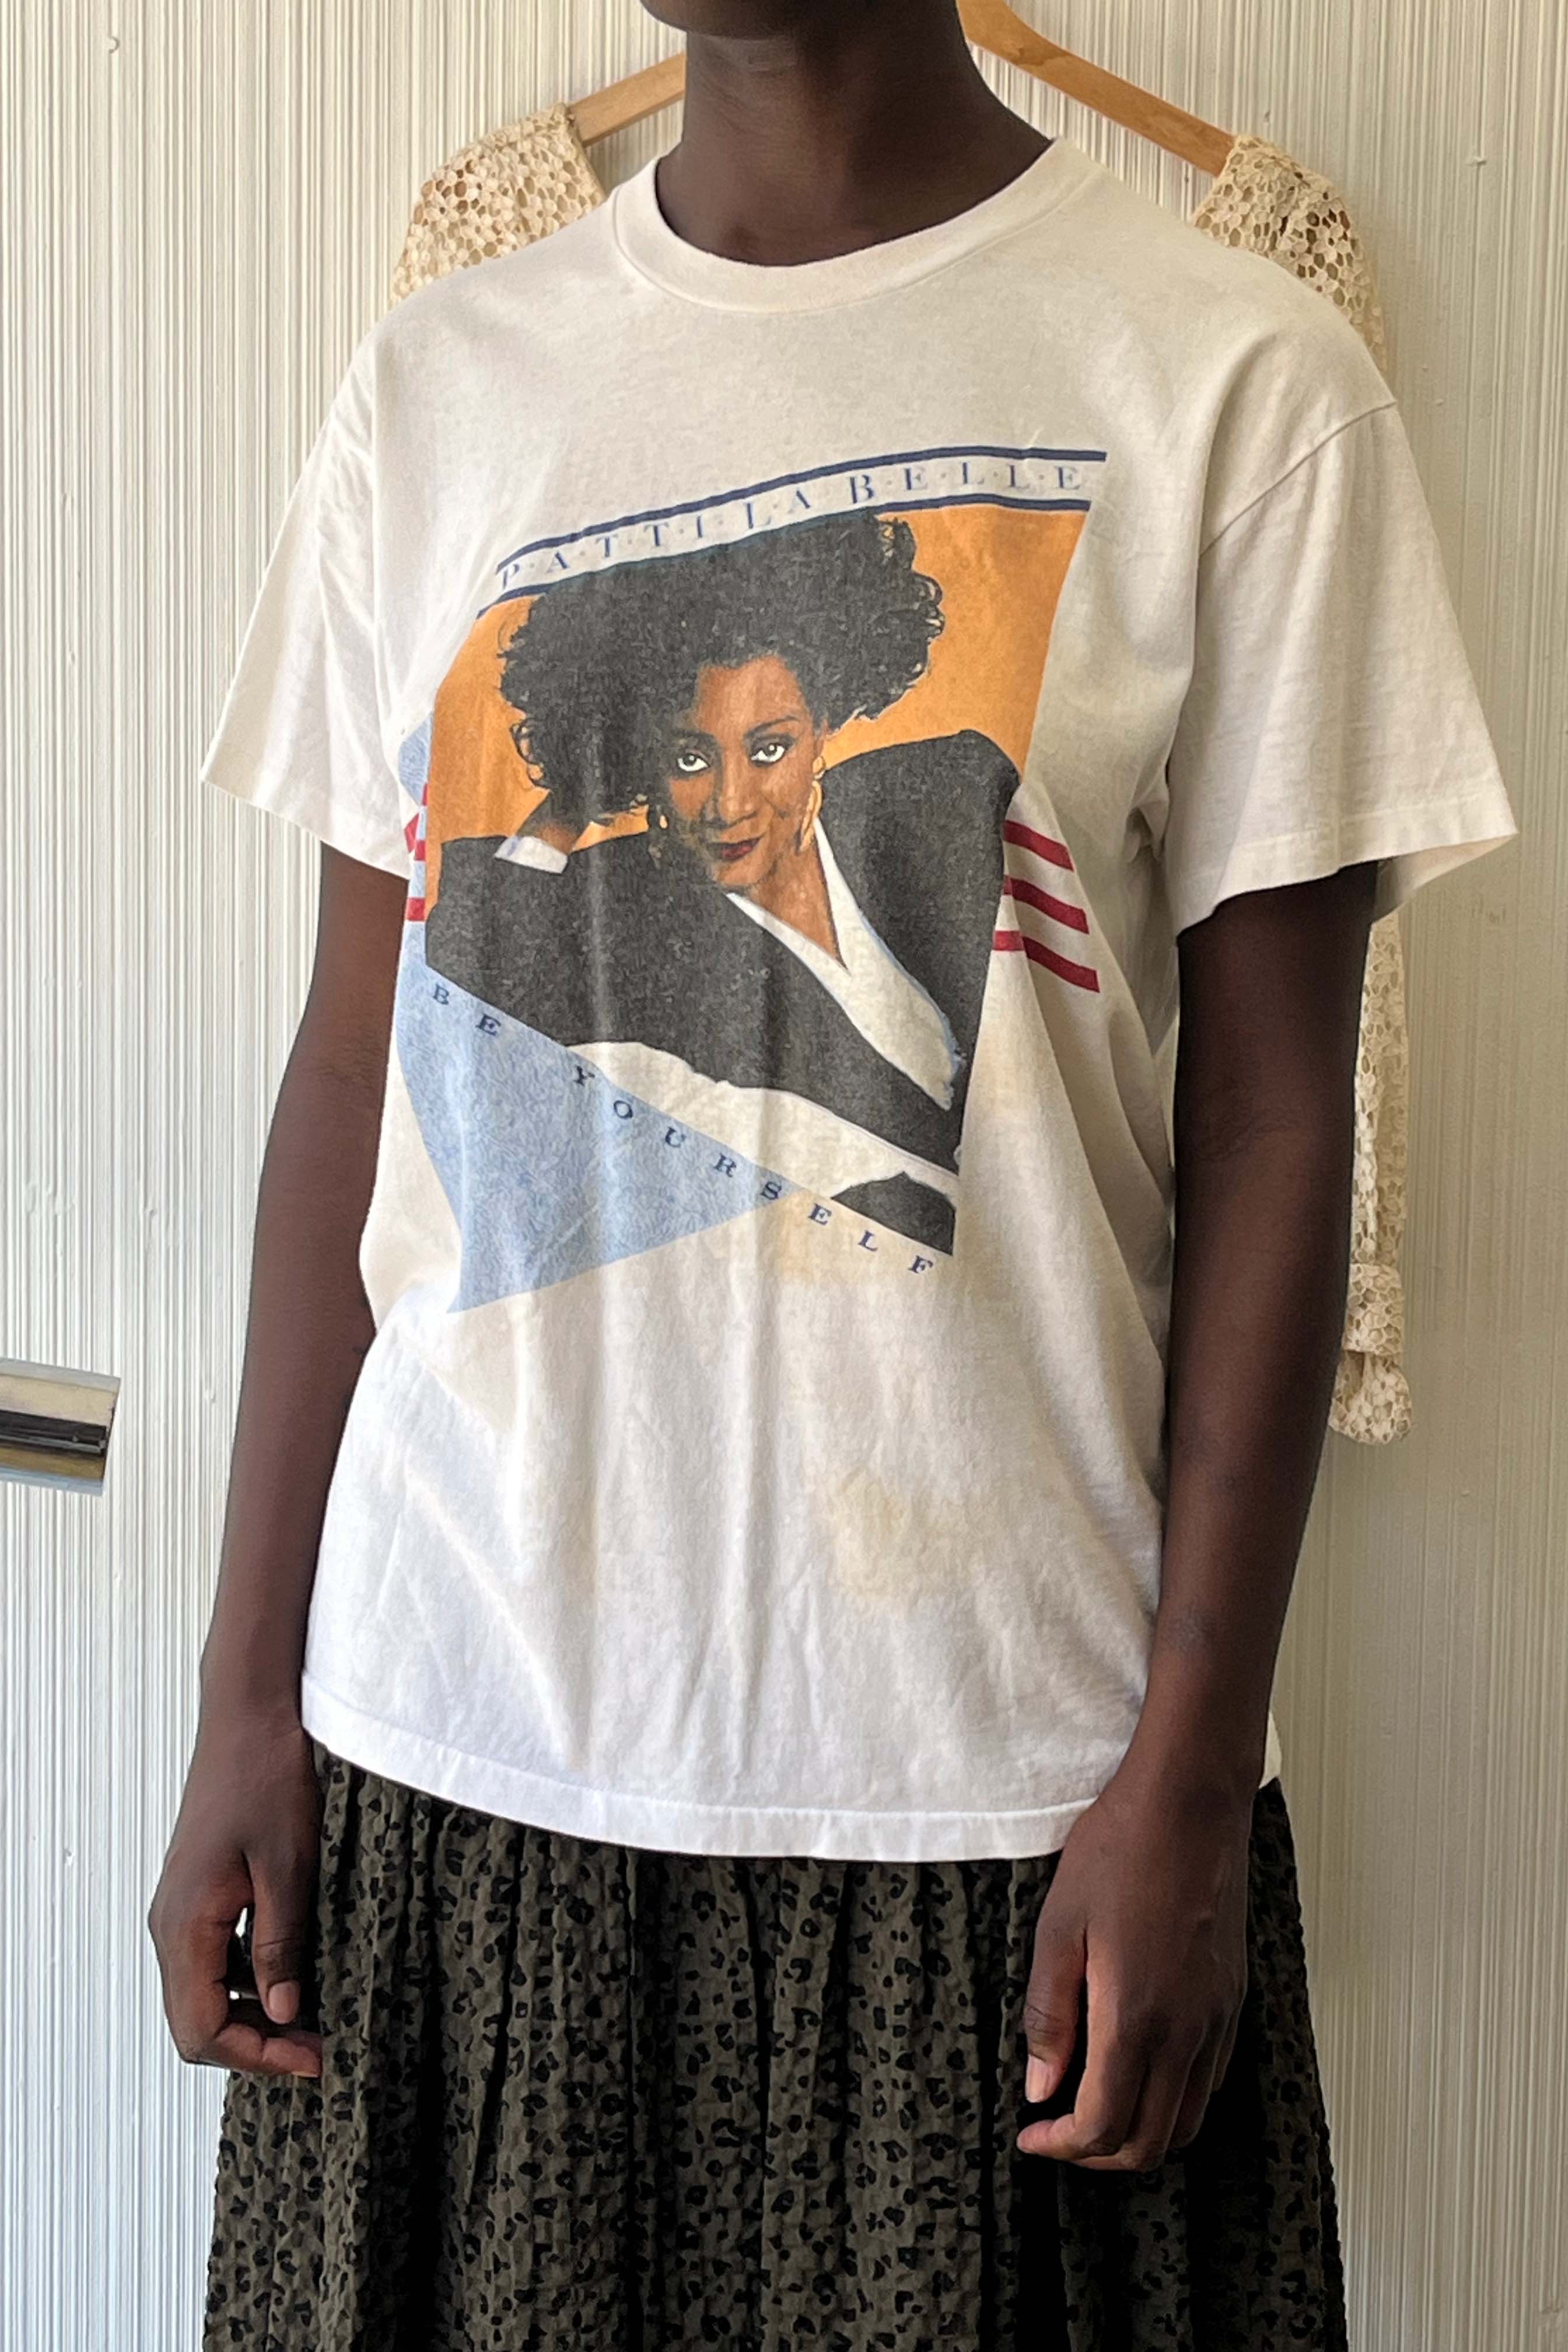 Vintage Patti LaBelle "Be Yourself" Tee